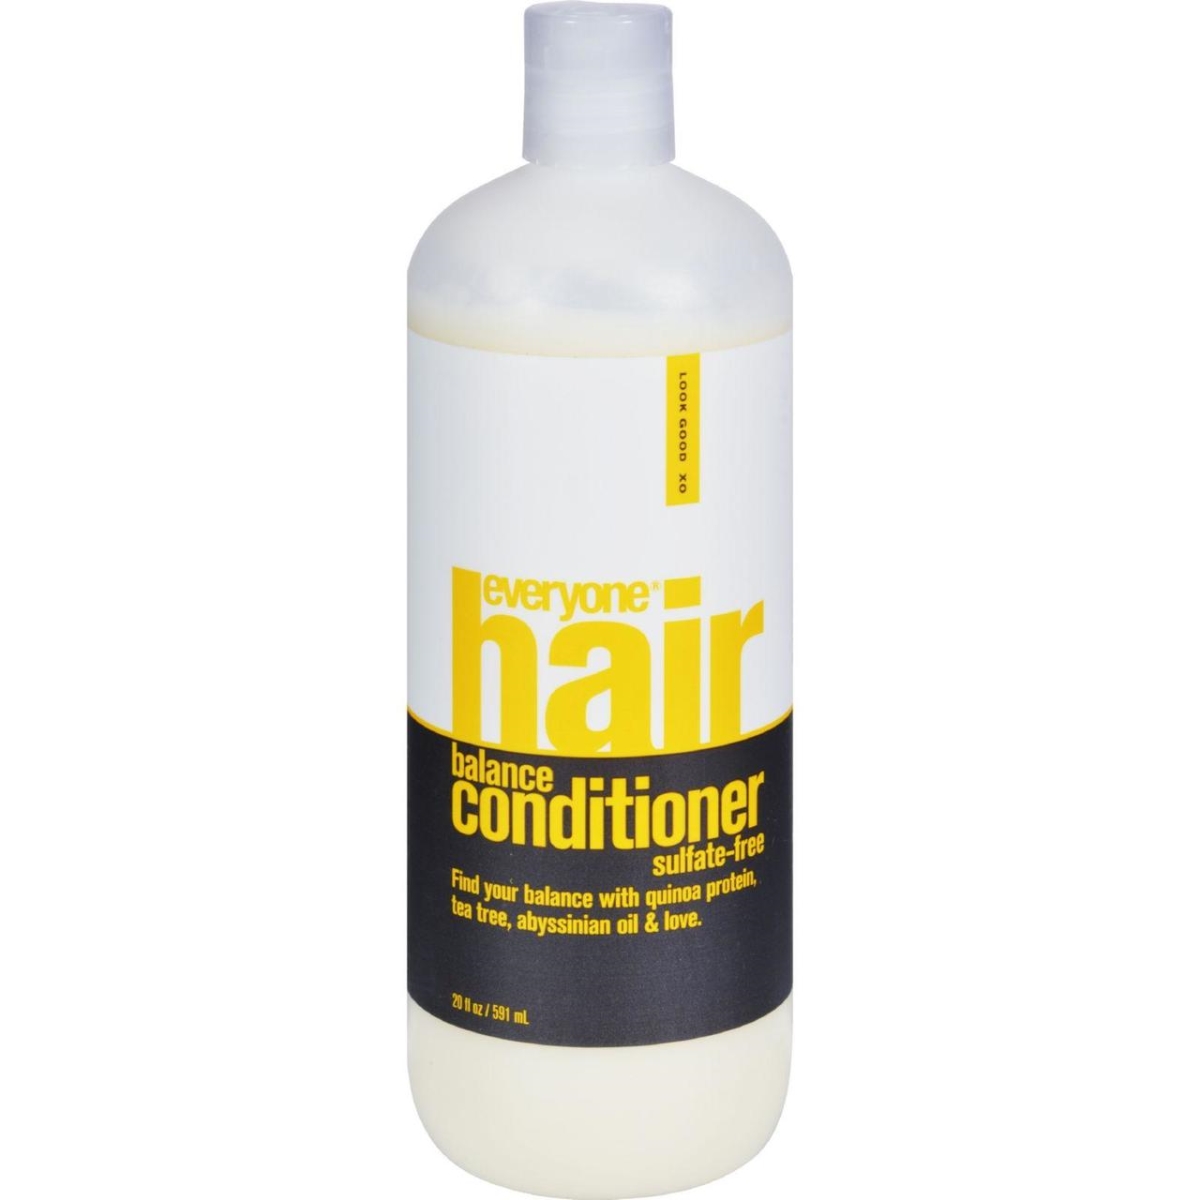 Hg1513704 20 Fl Oz Sulfate Free Conditioner For Everyone Hair